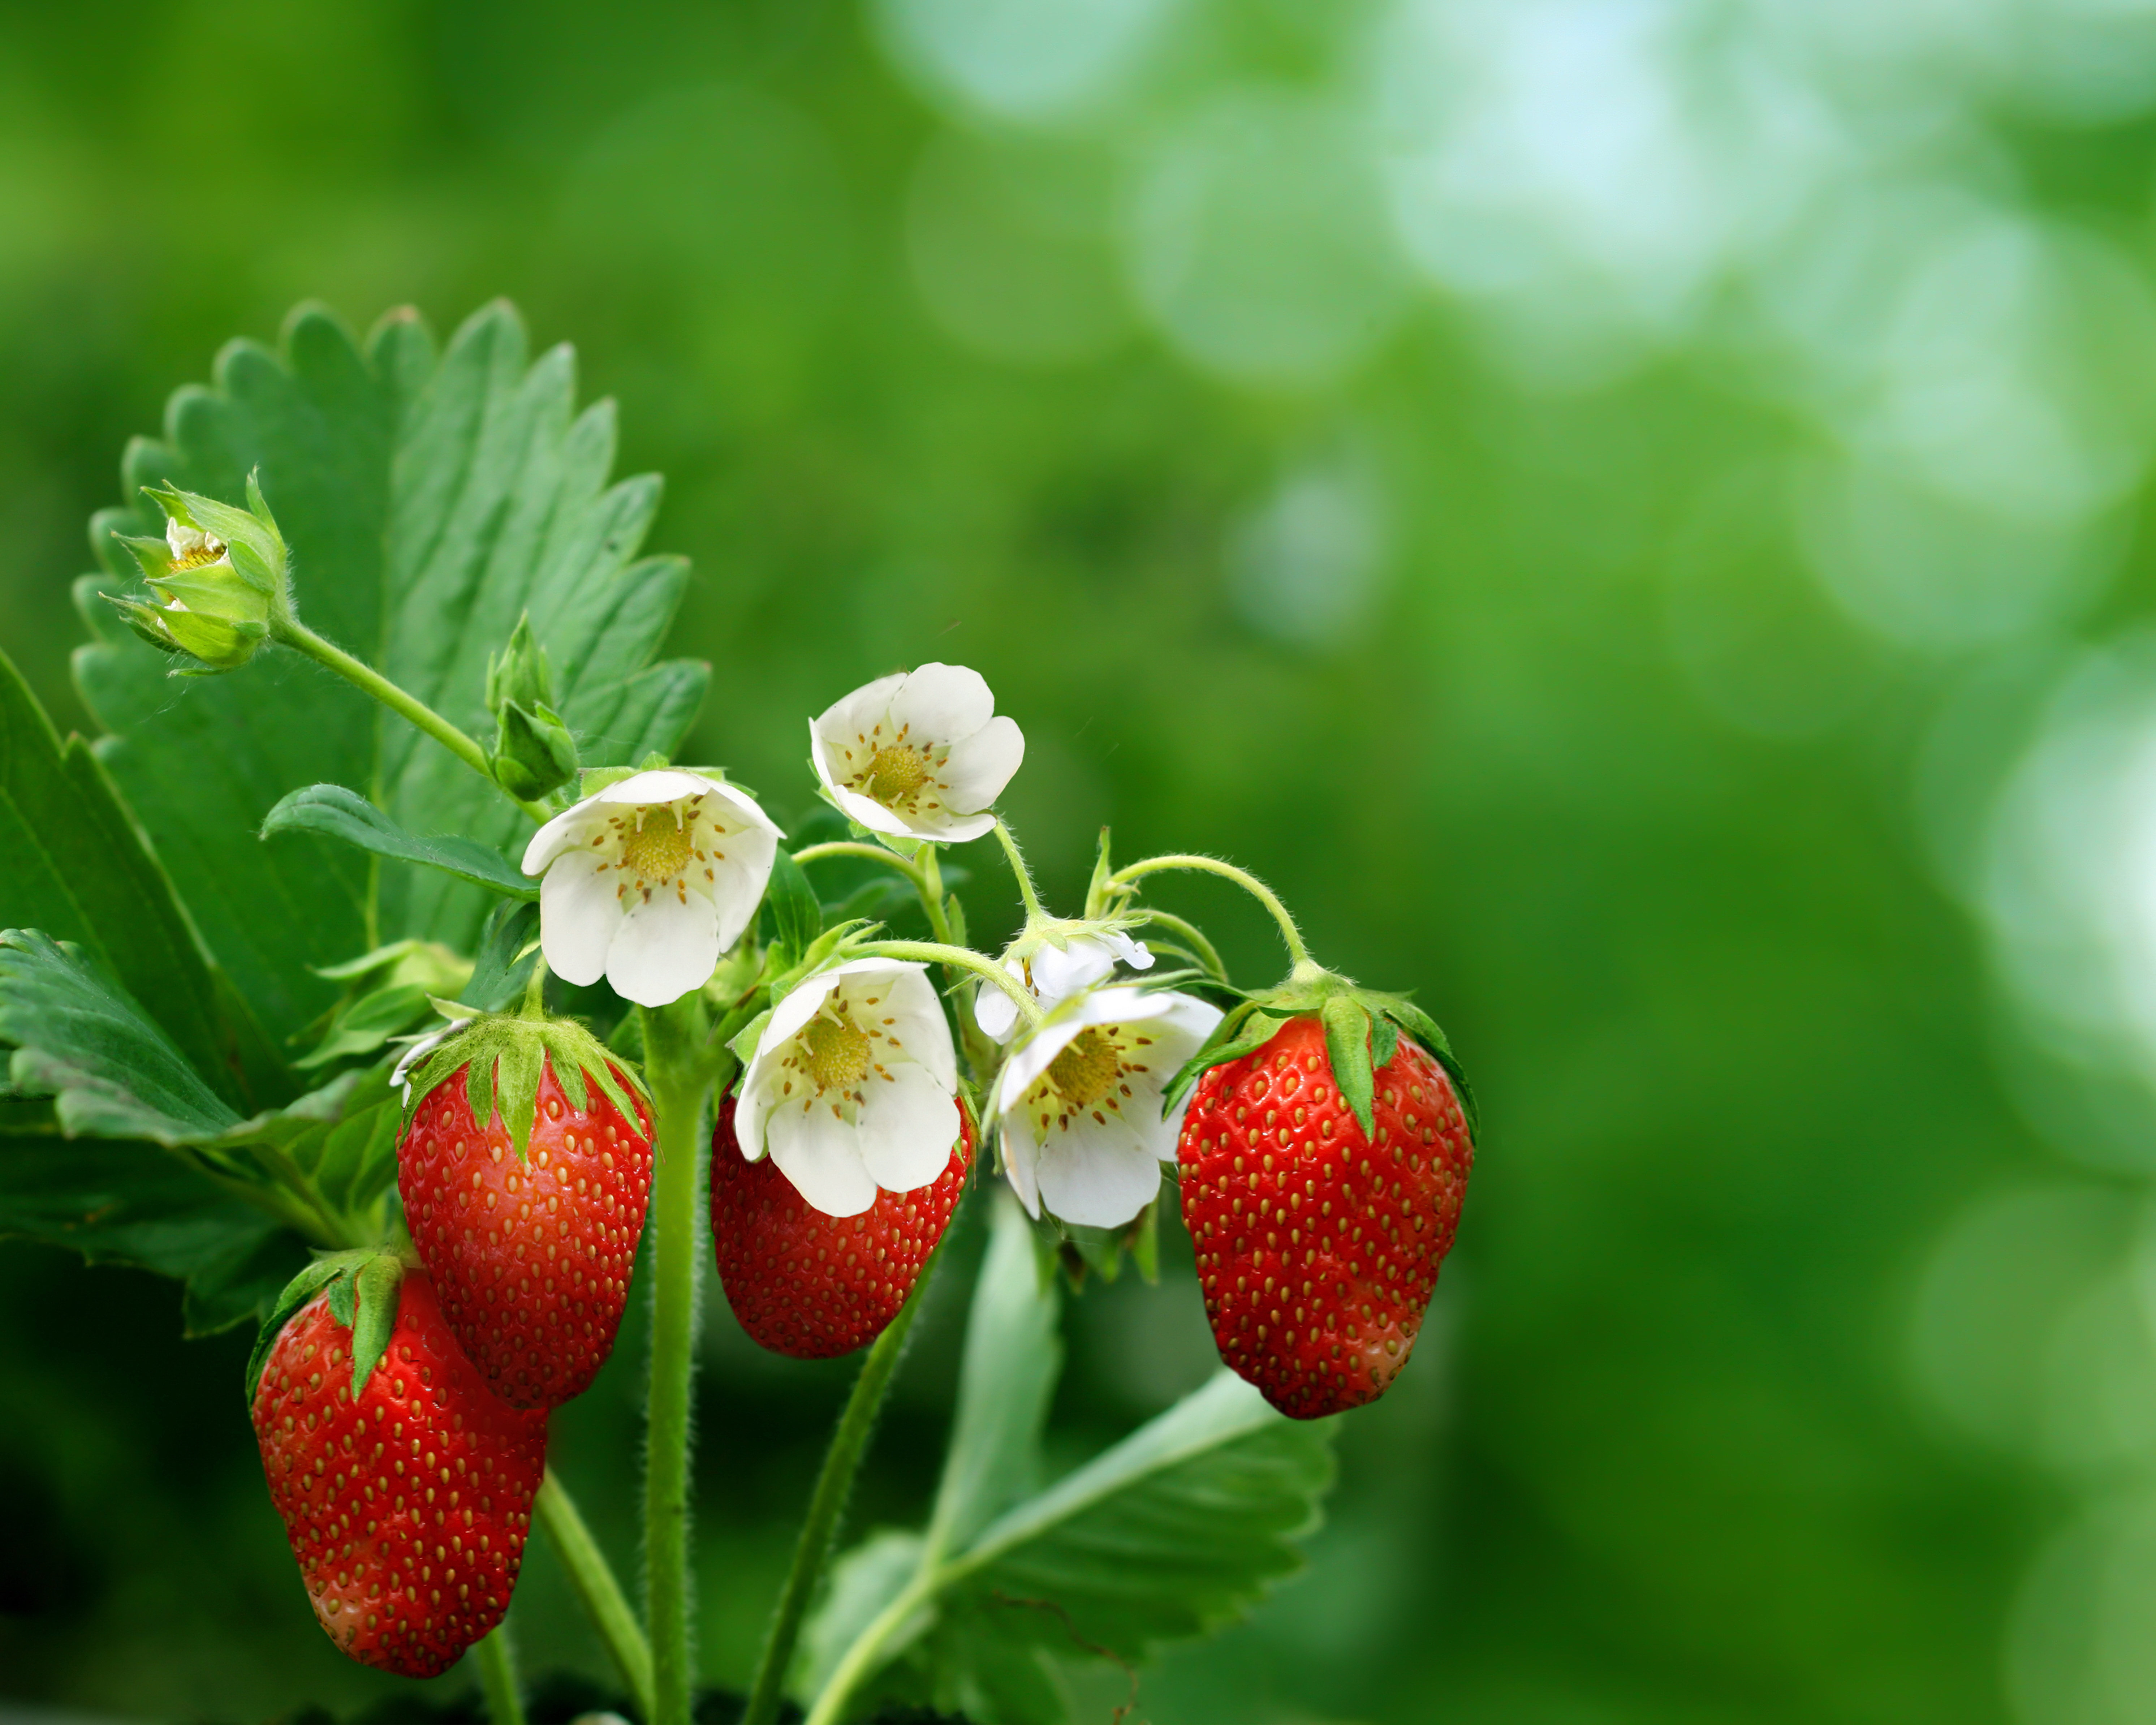 flowers, ripe, strawberry, berries, food, blur, smooth images